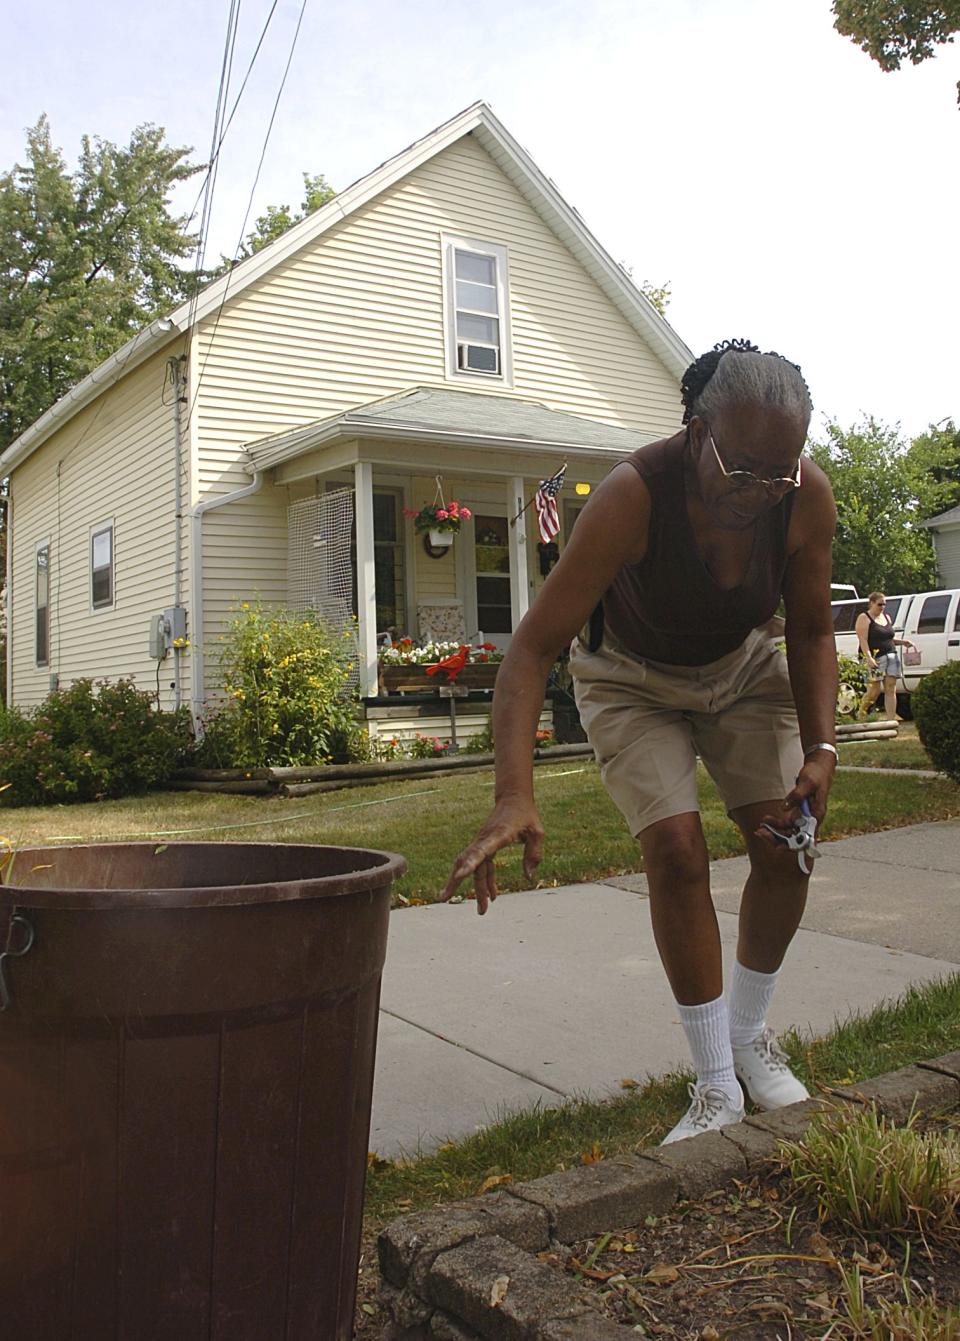 Hazel Bethea, close friend of Ruth Hallman and President of the Neighborhood Watch 120, does some yard work in front of the slain community activist's house Saturday. SHOOT DATE: 080407
PHOTO BY STAFF PHOTOGRAPHER ROBERT KILLIPS: